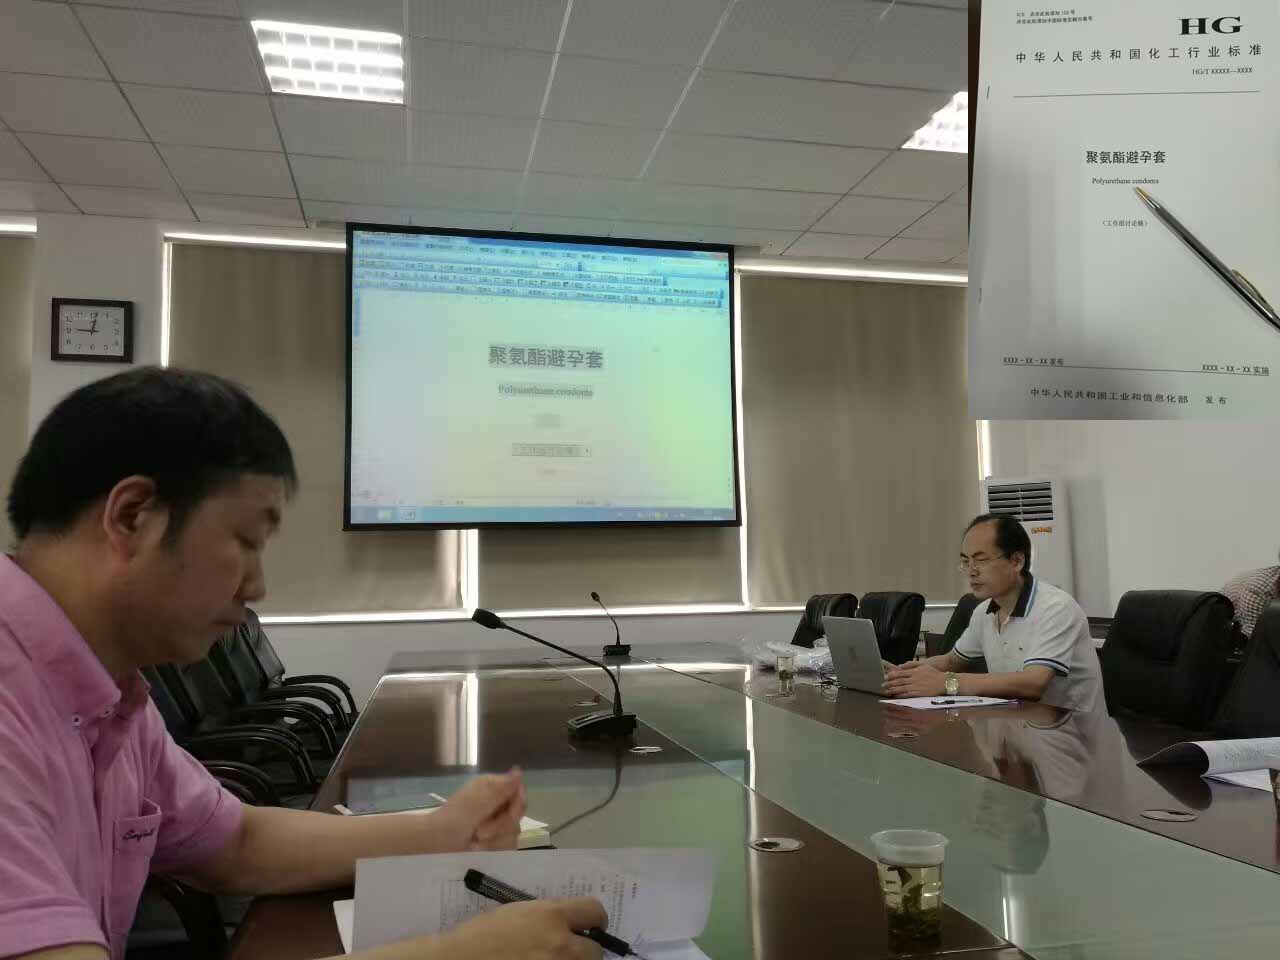 China polyurethane condom industry standard in discussing now.